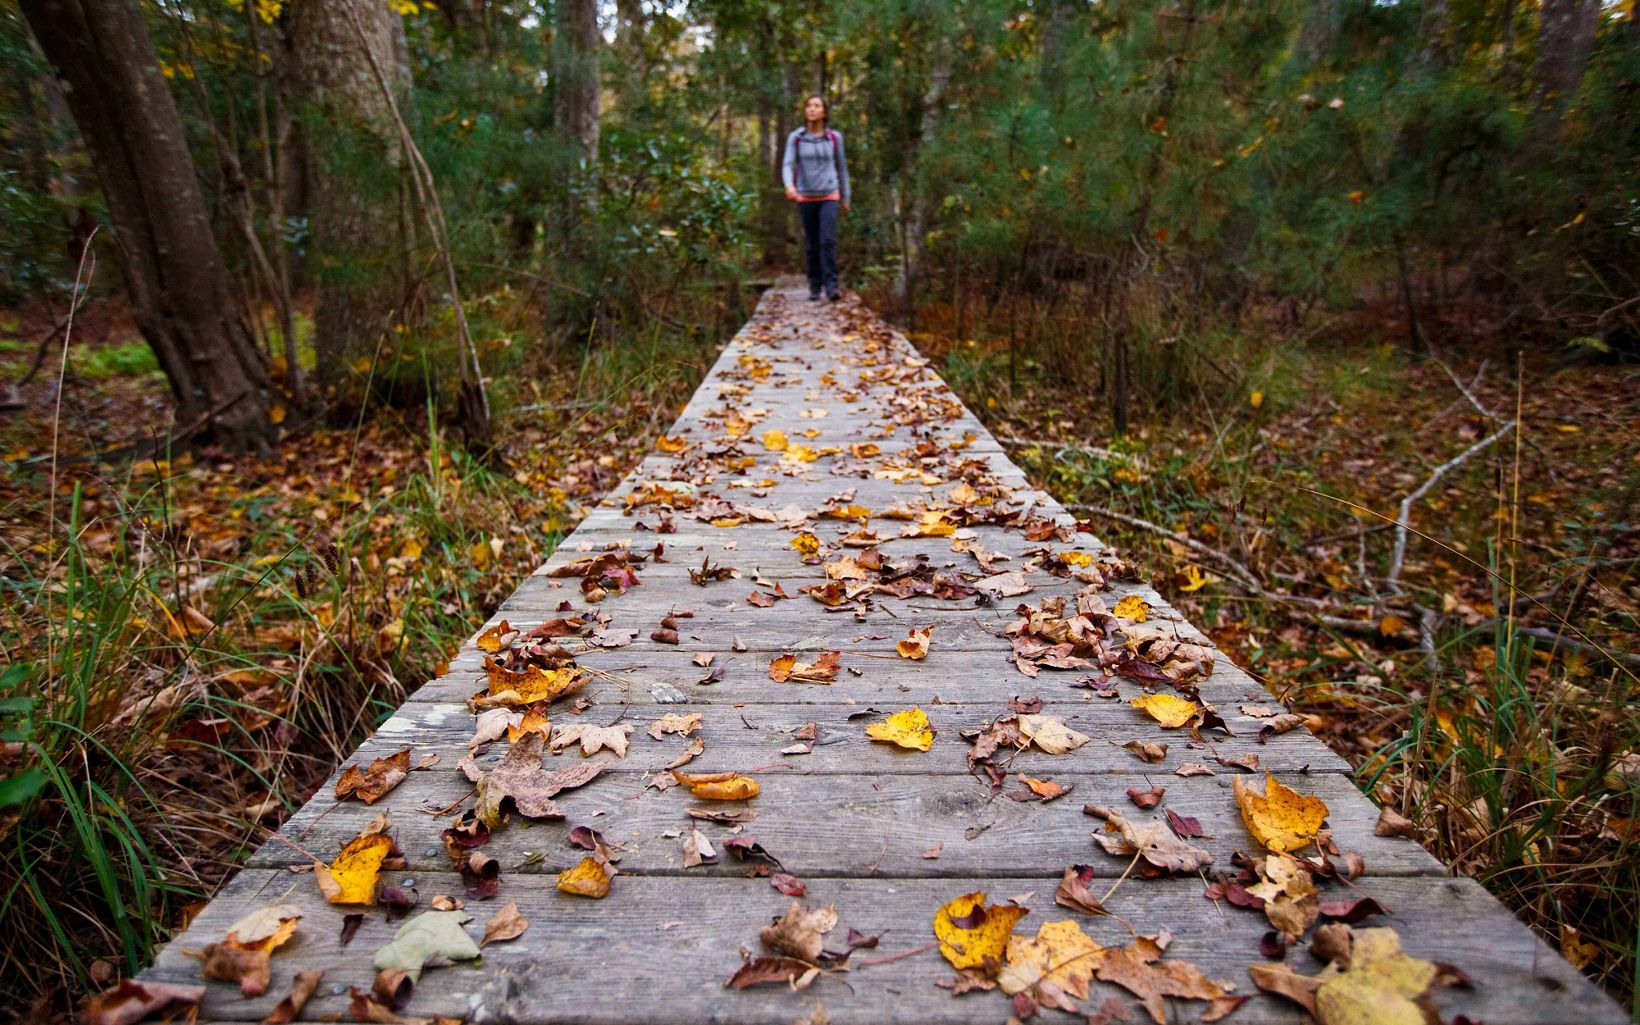 A hiker walks towards the camera along a boardwalk covered in yellow and brown leaves.